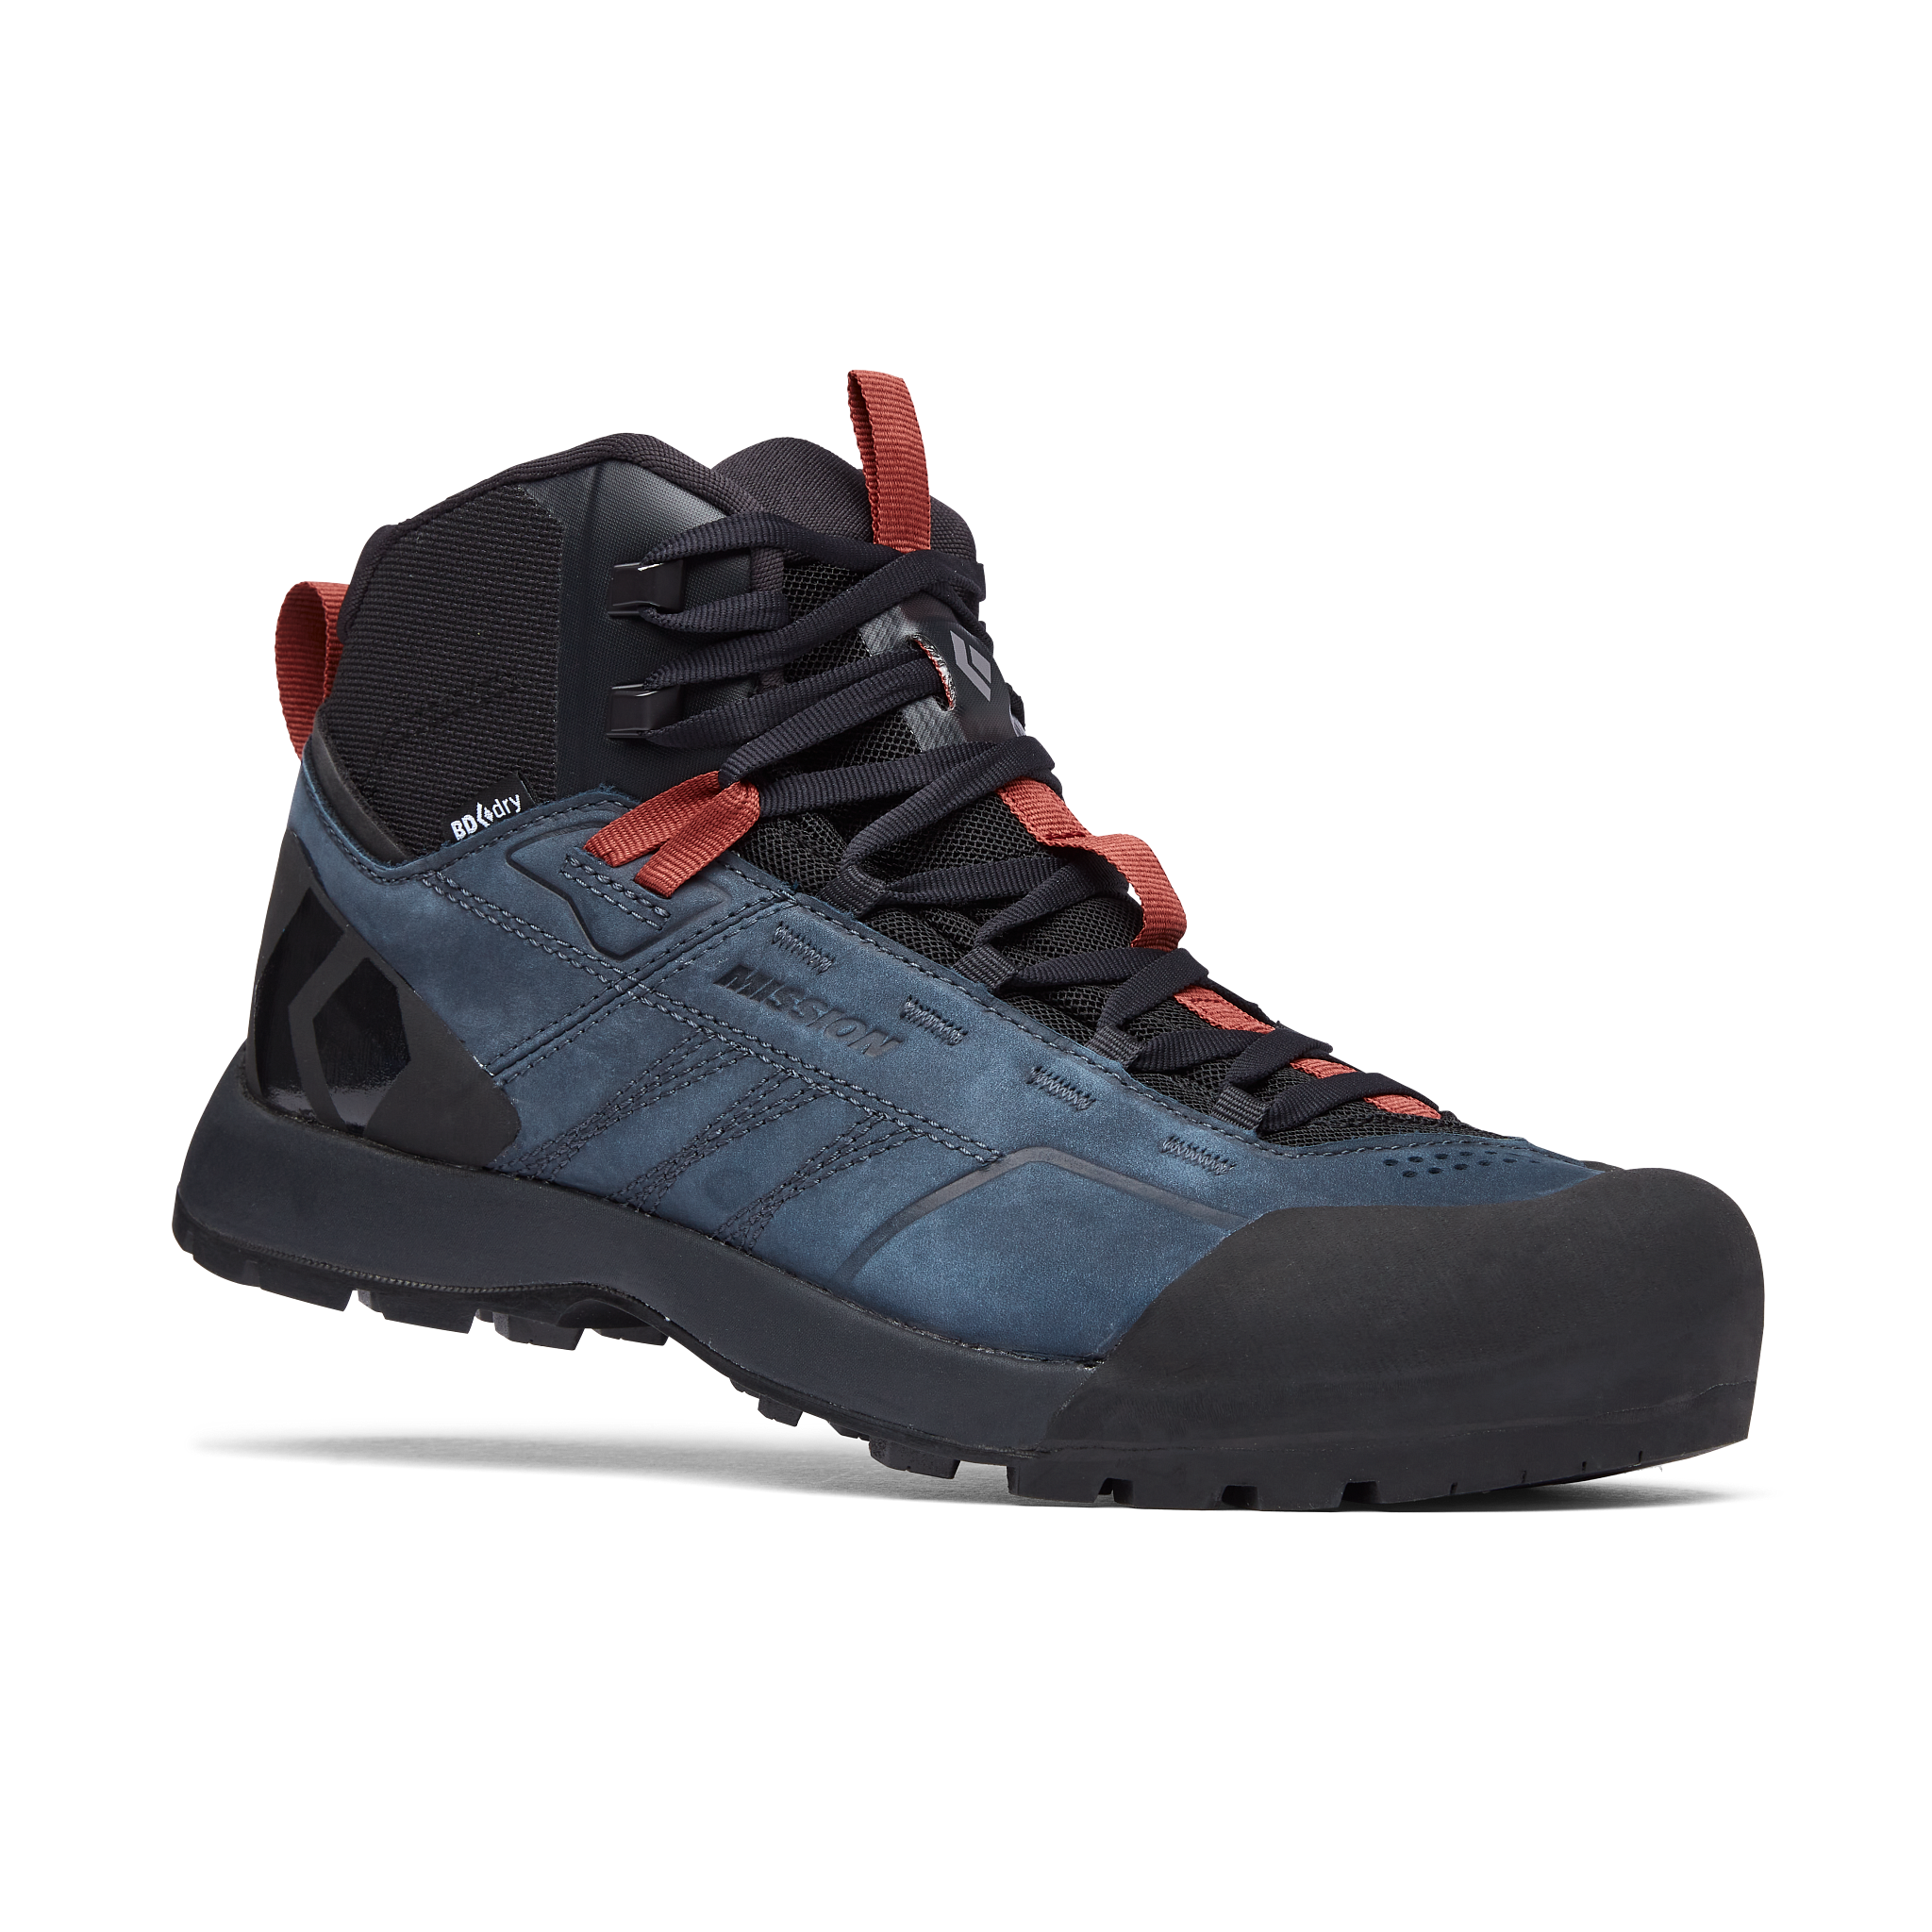 Black Diamond Equipment Men's Mission Leather Mid Waterproof Approach Shoes 2nds US 10 Eclipse/Red Rock